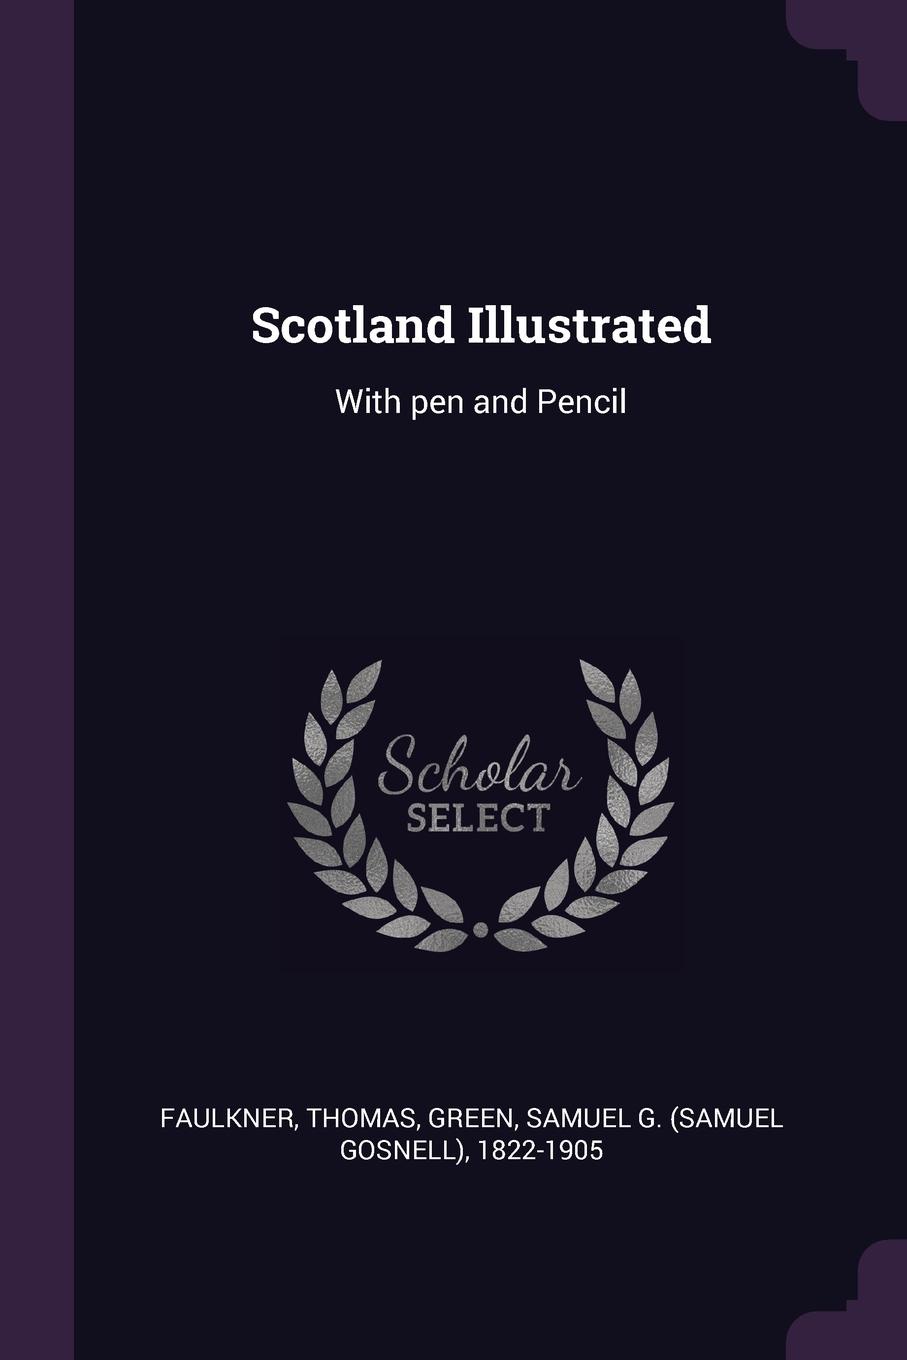 Scotland Illustrated. With pen and Pencil